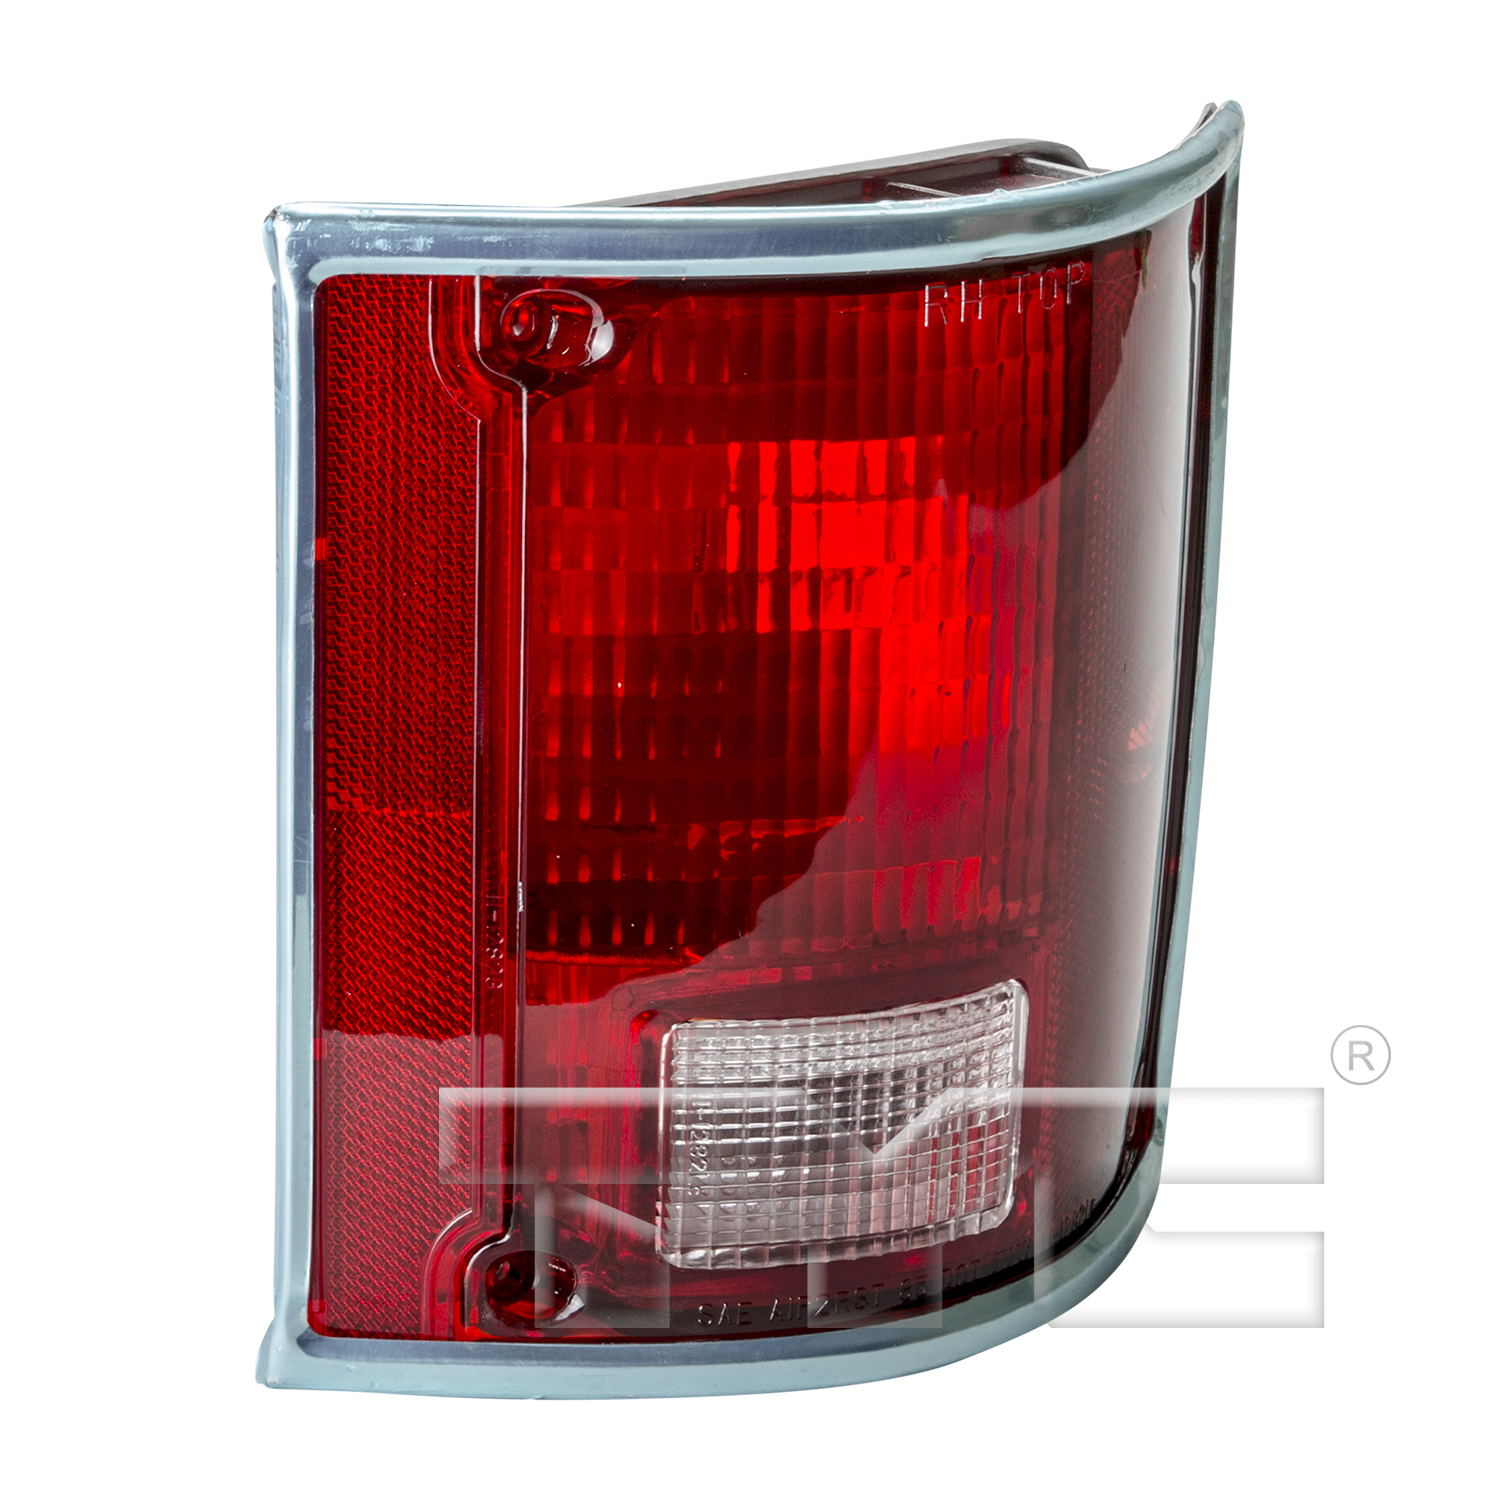 Aftermarket TAILLIGHTS for CHEVROLET - C20, C20,78-86,RT Taillamp assy